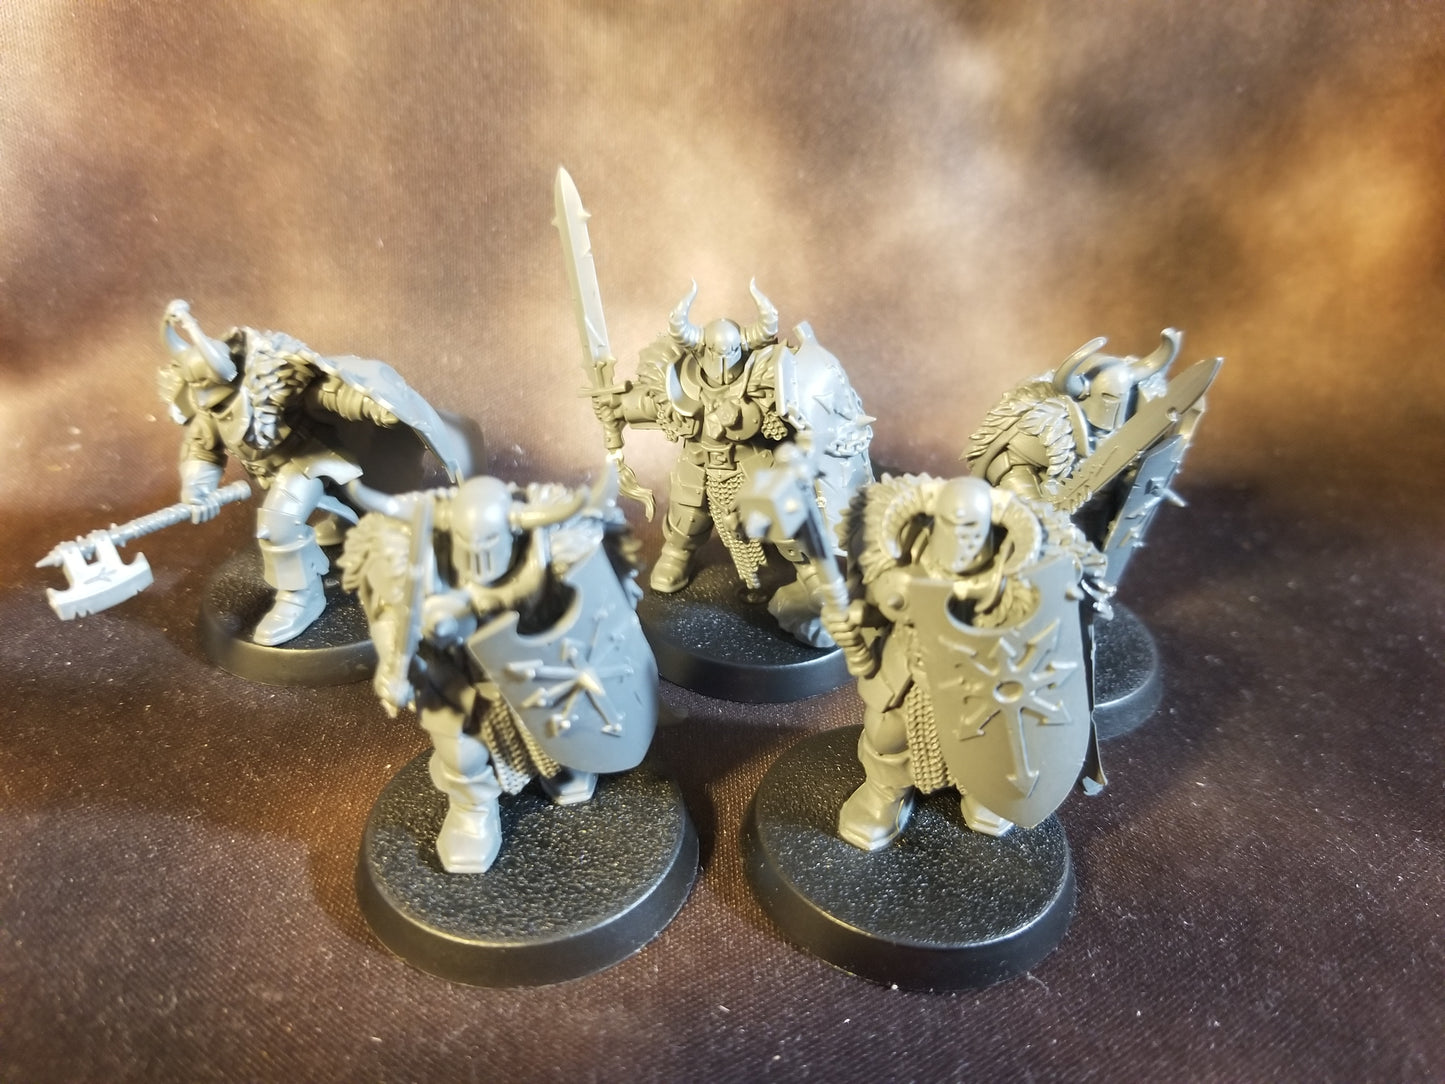 Warhammer Age of Sigmar Chaos Slaves to Darkness Warriors